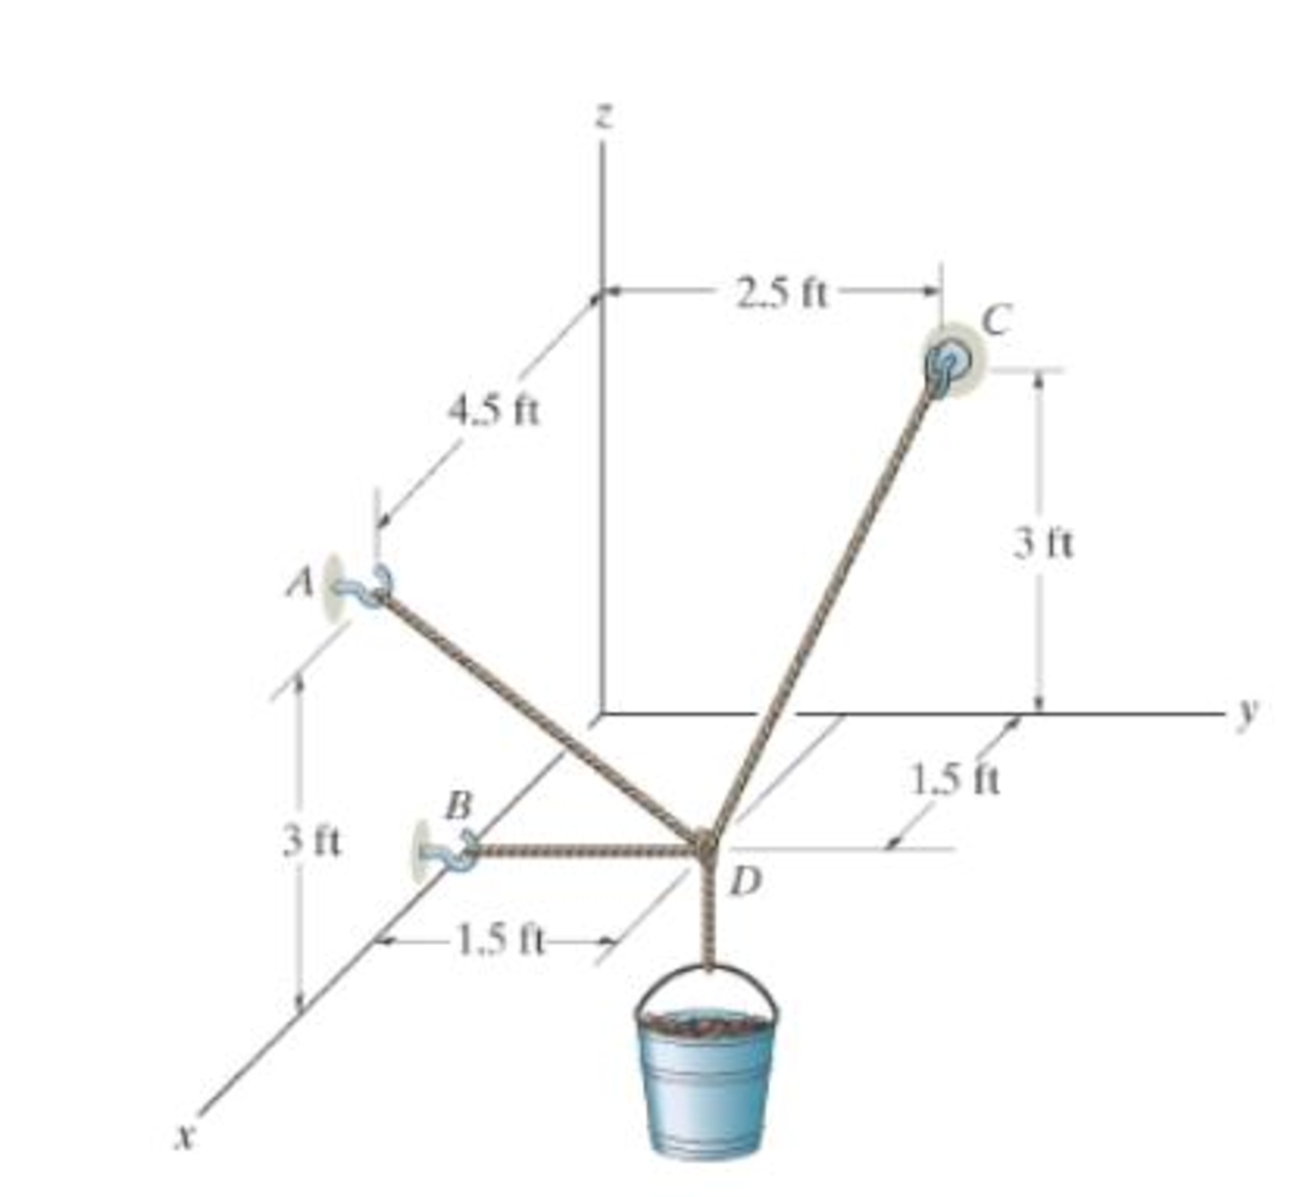 Chapter 3.4, Problem 46P, If the bucket and its contents have a total weight of 20 lb, determine the force in the supporting 